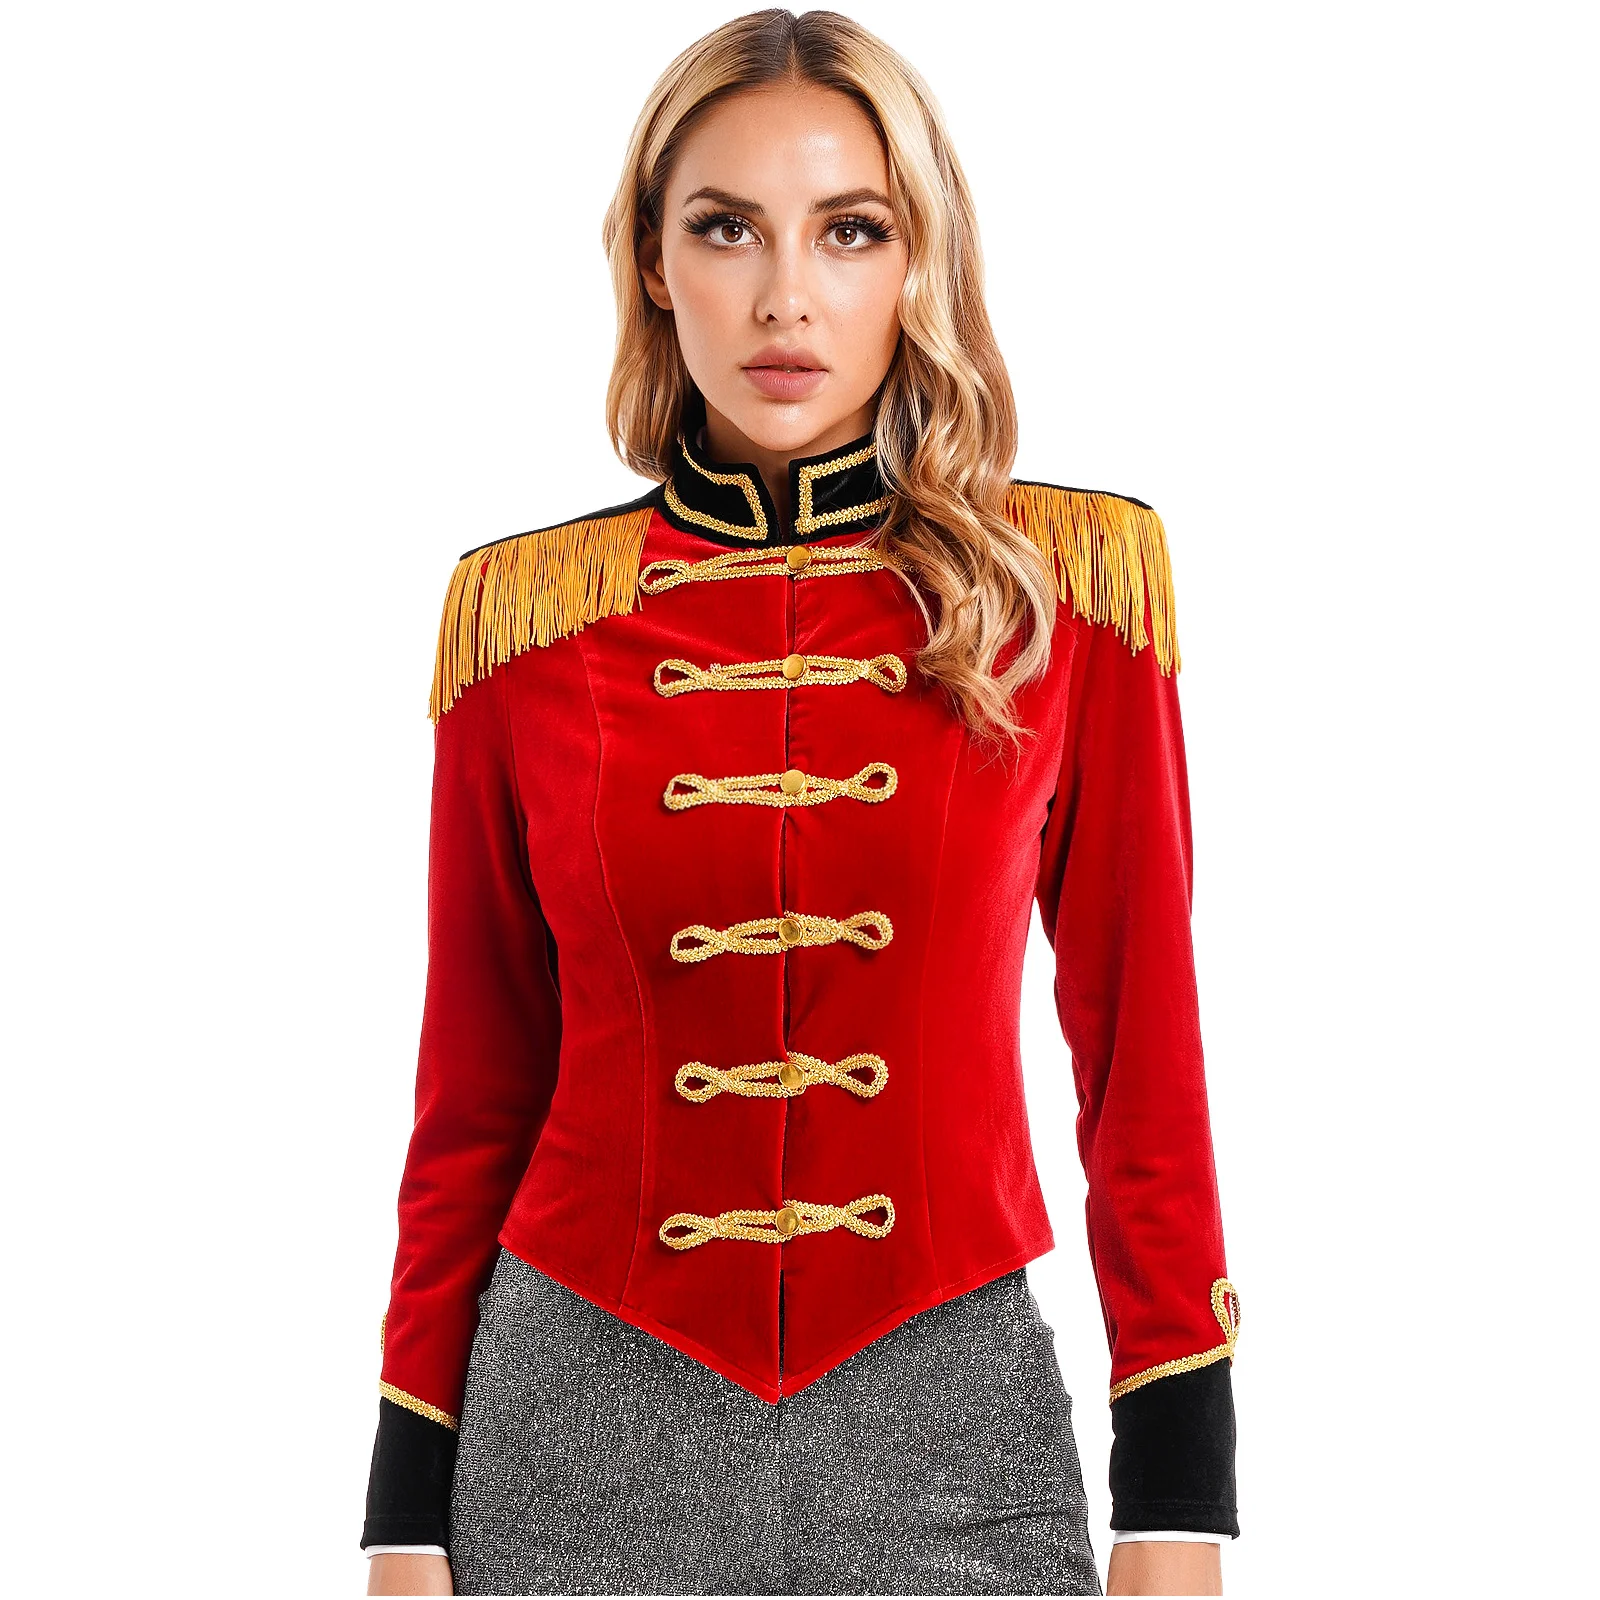 Womens Circus Ringmaster Costume Stand Collar Fringed Shoulder Board Velvet Jacket Coat Halloween Carnival Party Cosplay Costume carnival party adult couple big sole costume role play halloween costume cosplay funny women